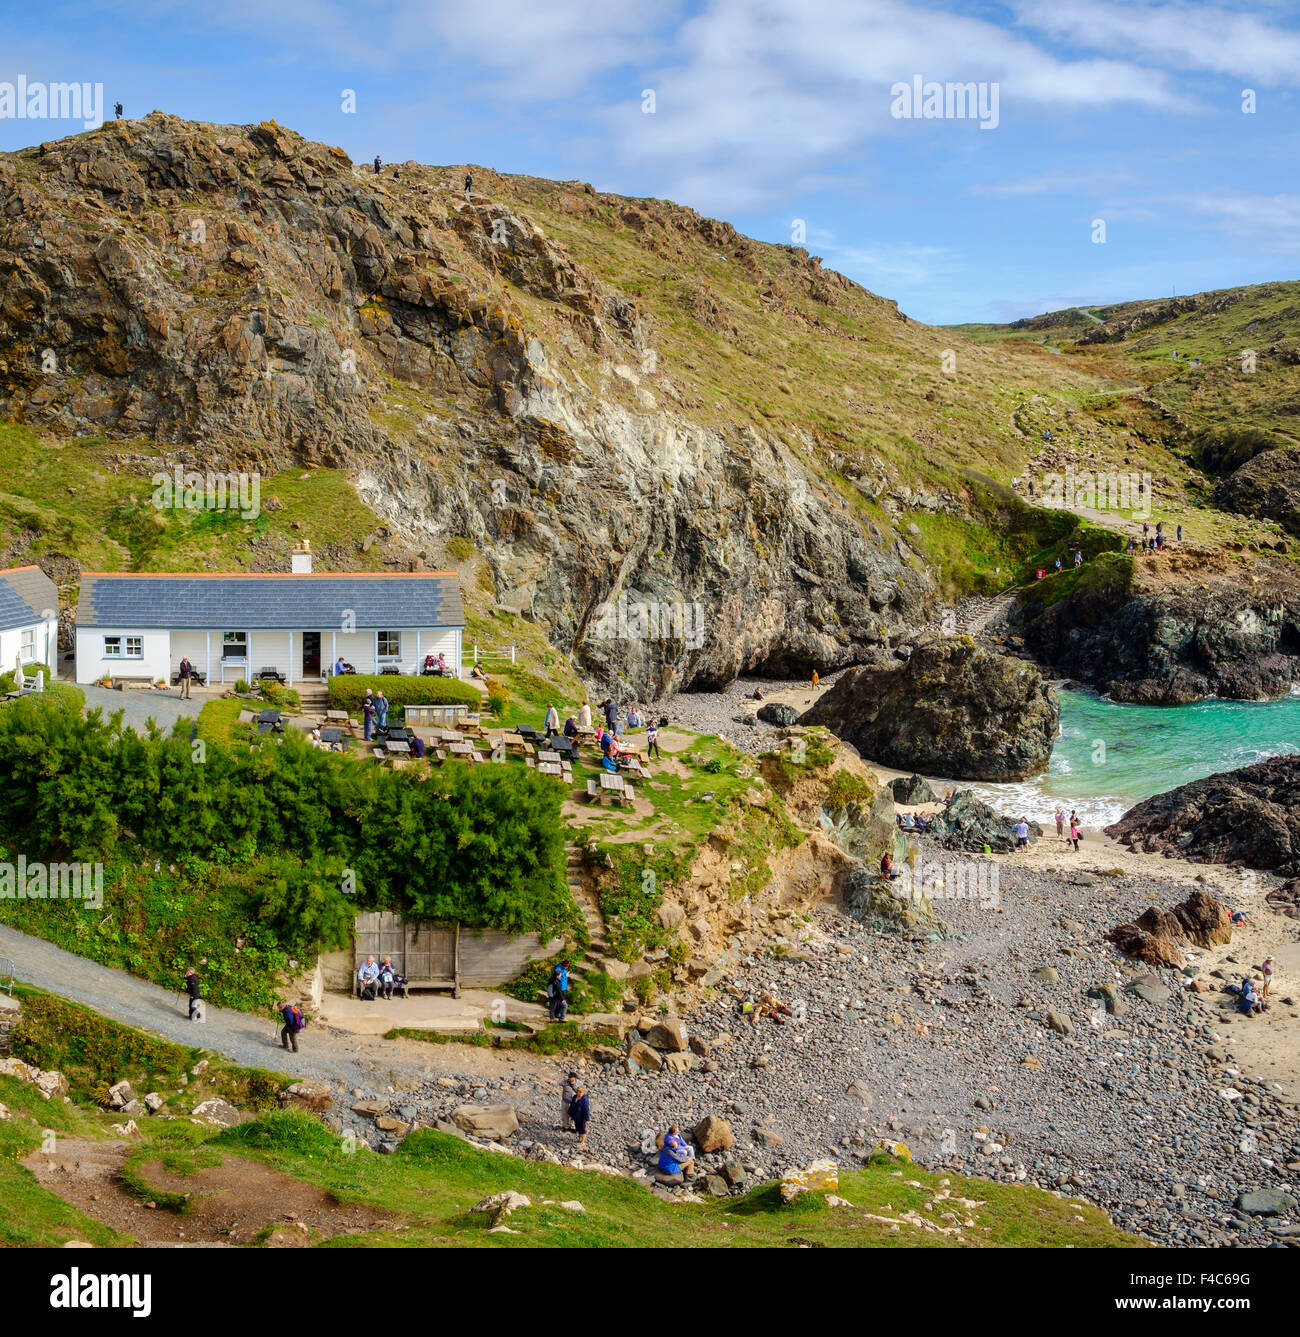 Cafe at Kynance Cove, bay and coastline, Lizard Peninsula, Cornwall, England, UK - from the South West Coast path Stock Photo